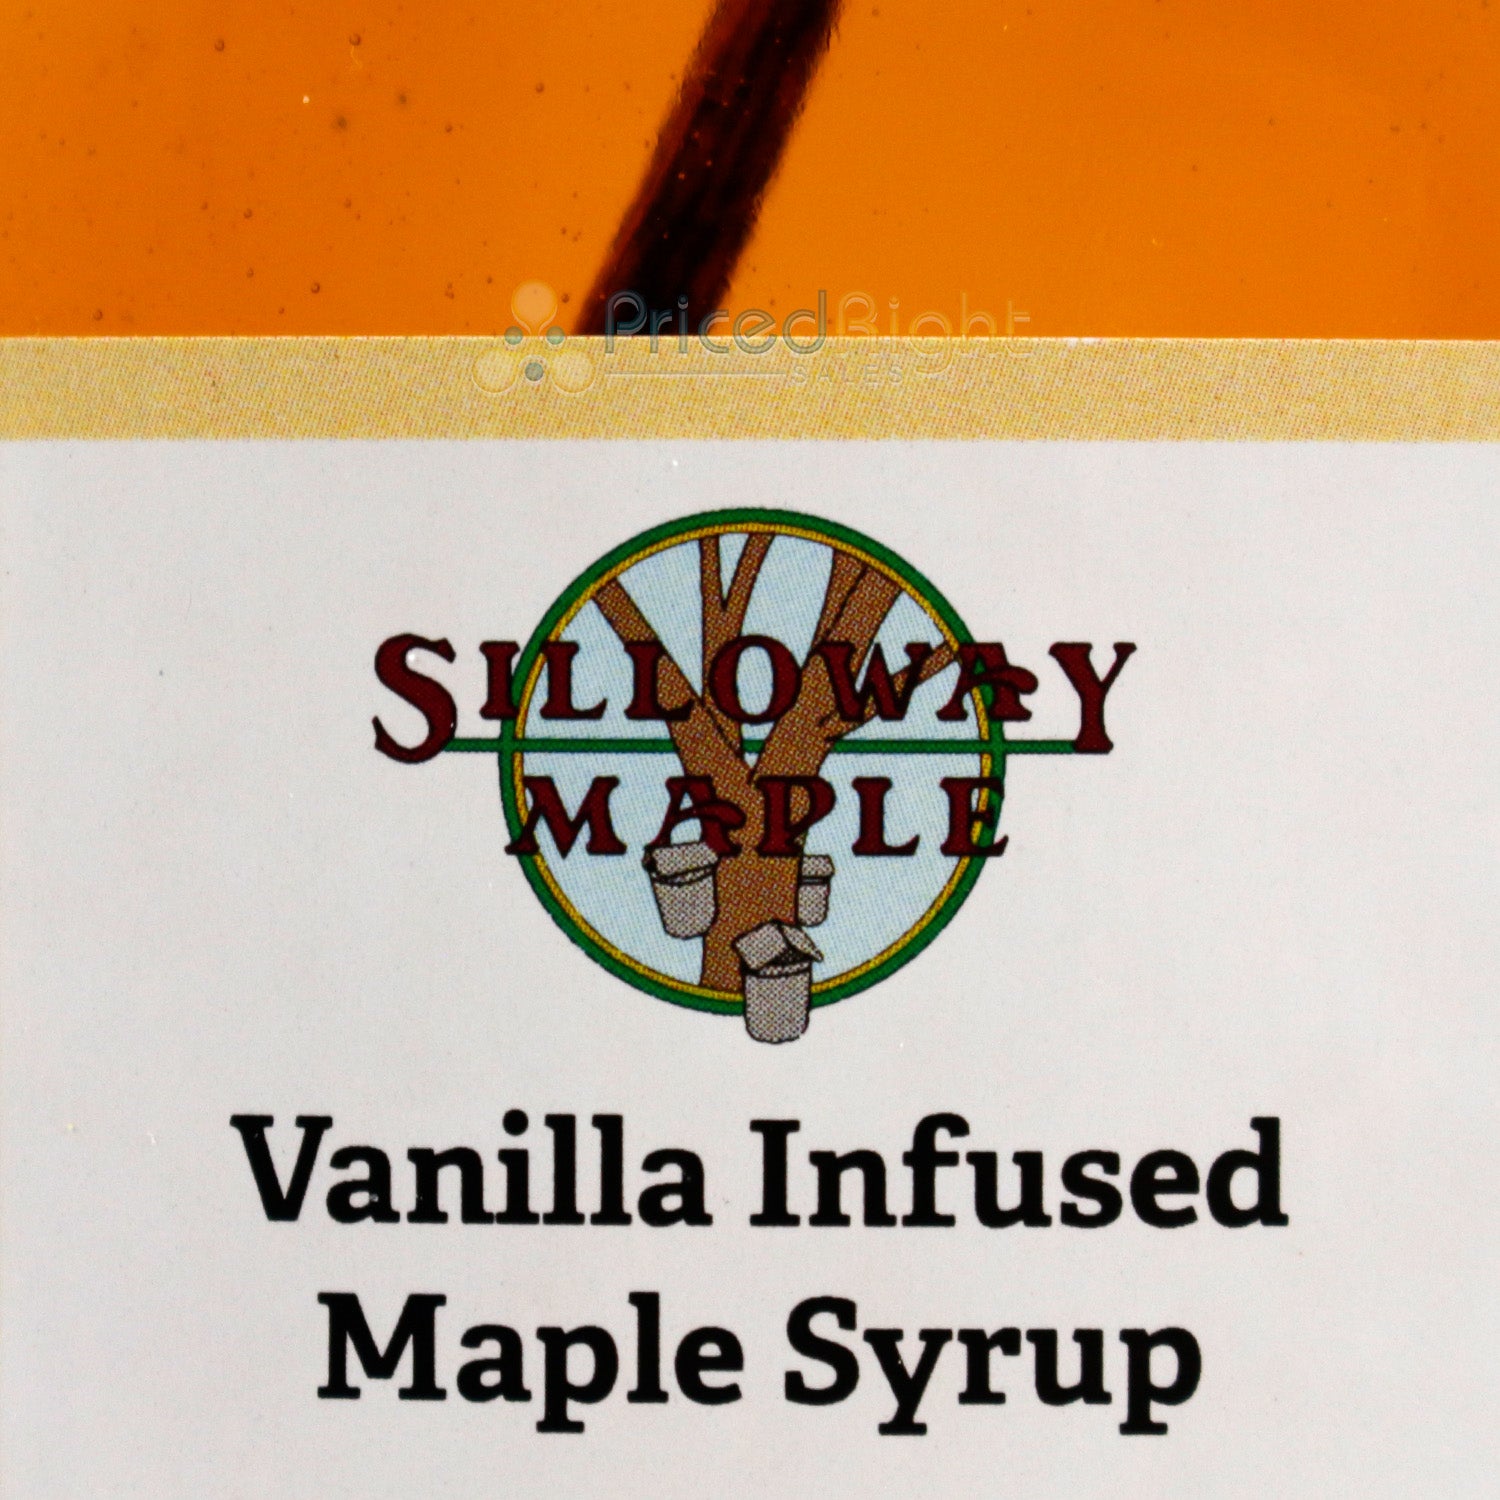 Silloway Maple Vanilla Infused Clean Energy Maple Syrup With Vanilla Bean 6.8 oz